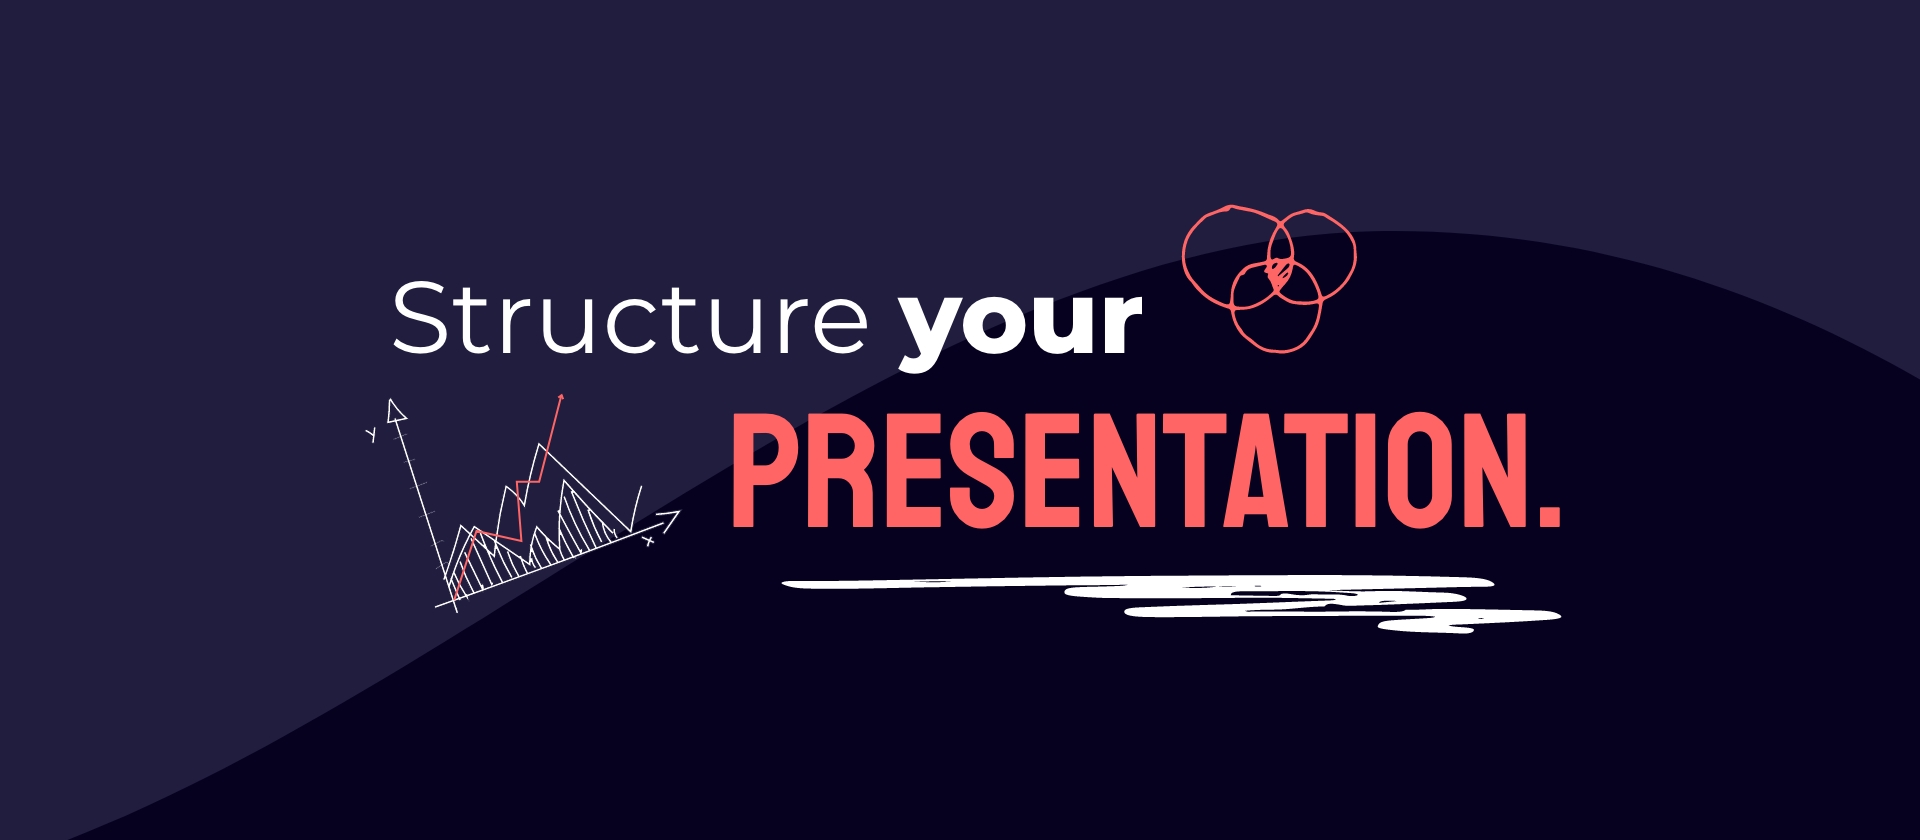 Presentation structure: take your audience on a journey.